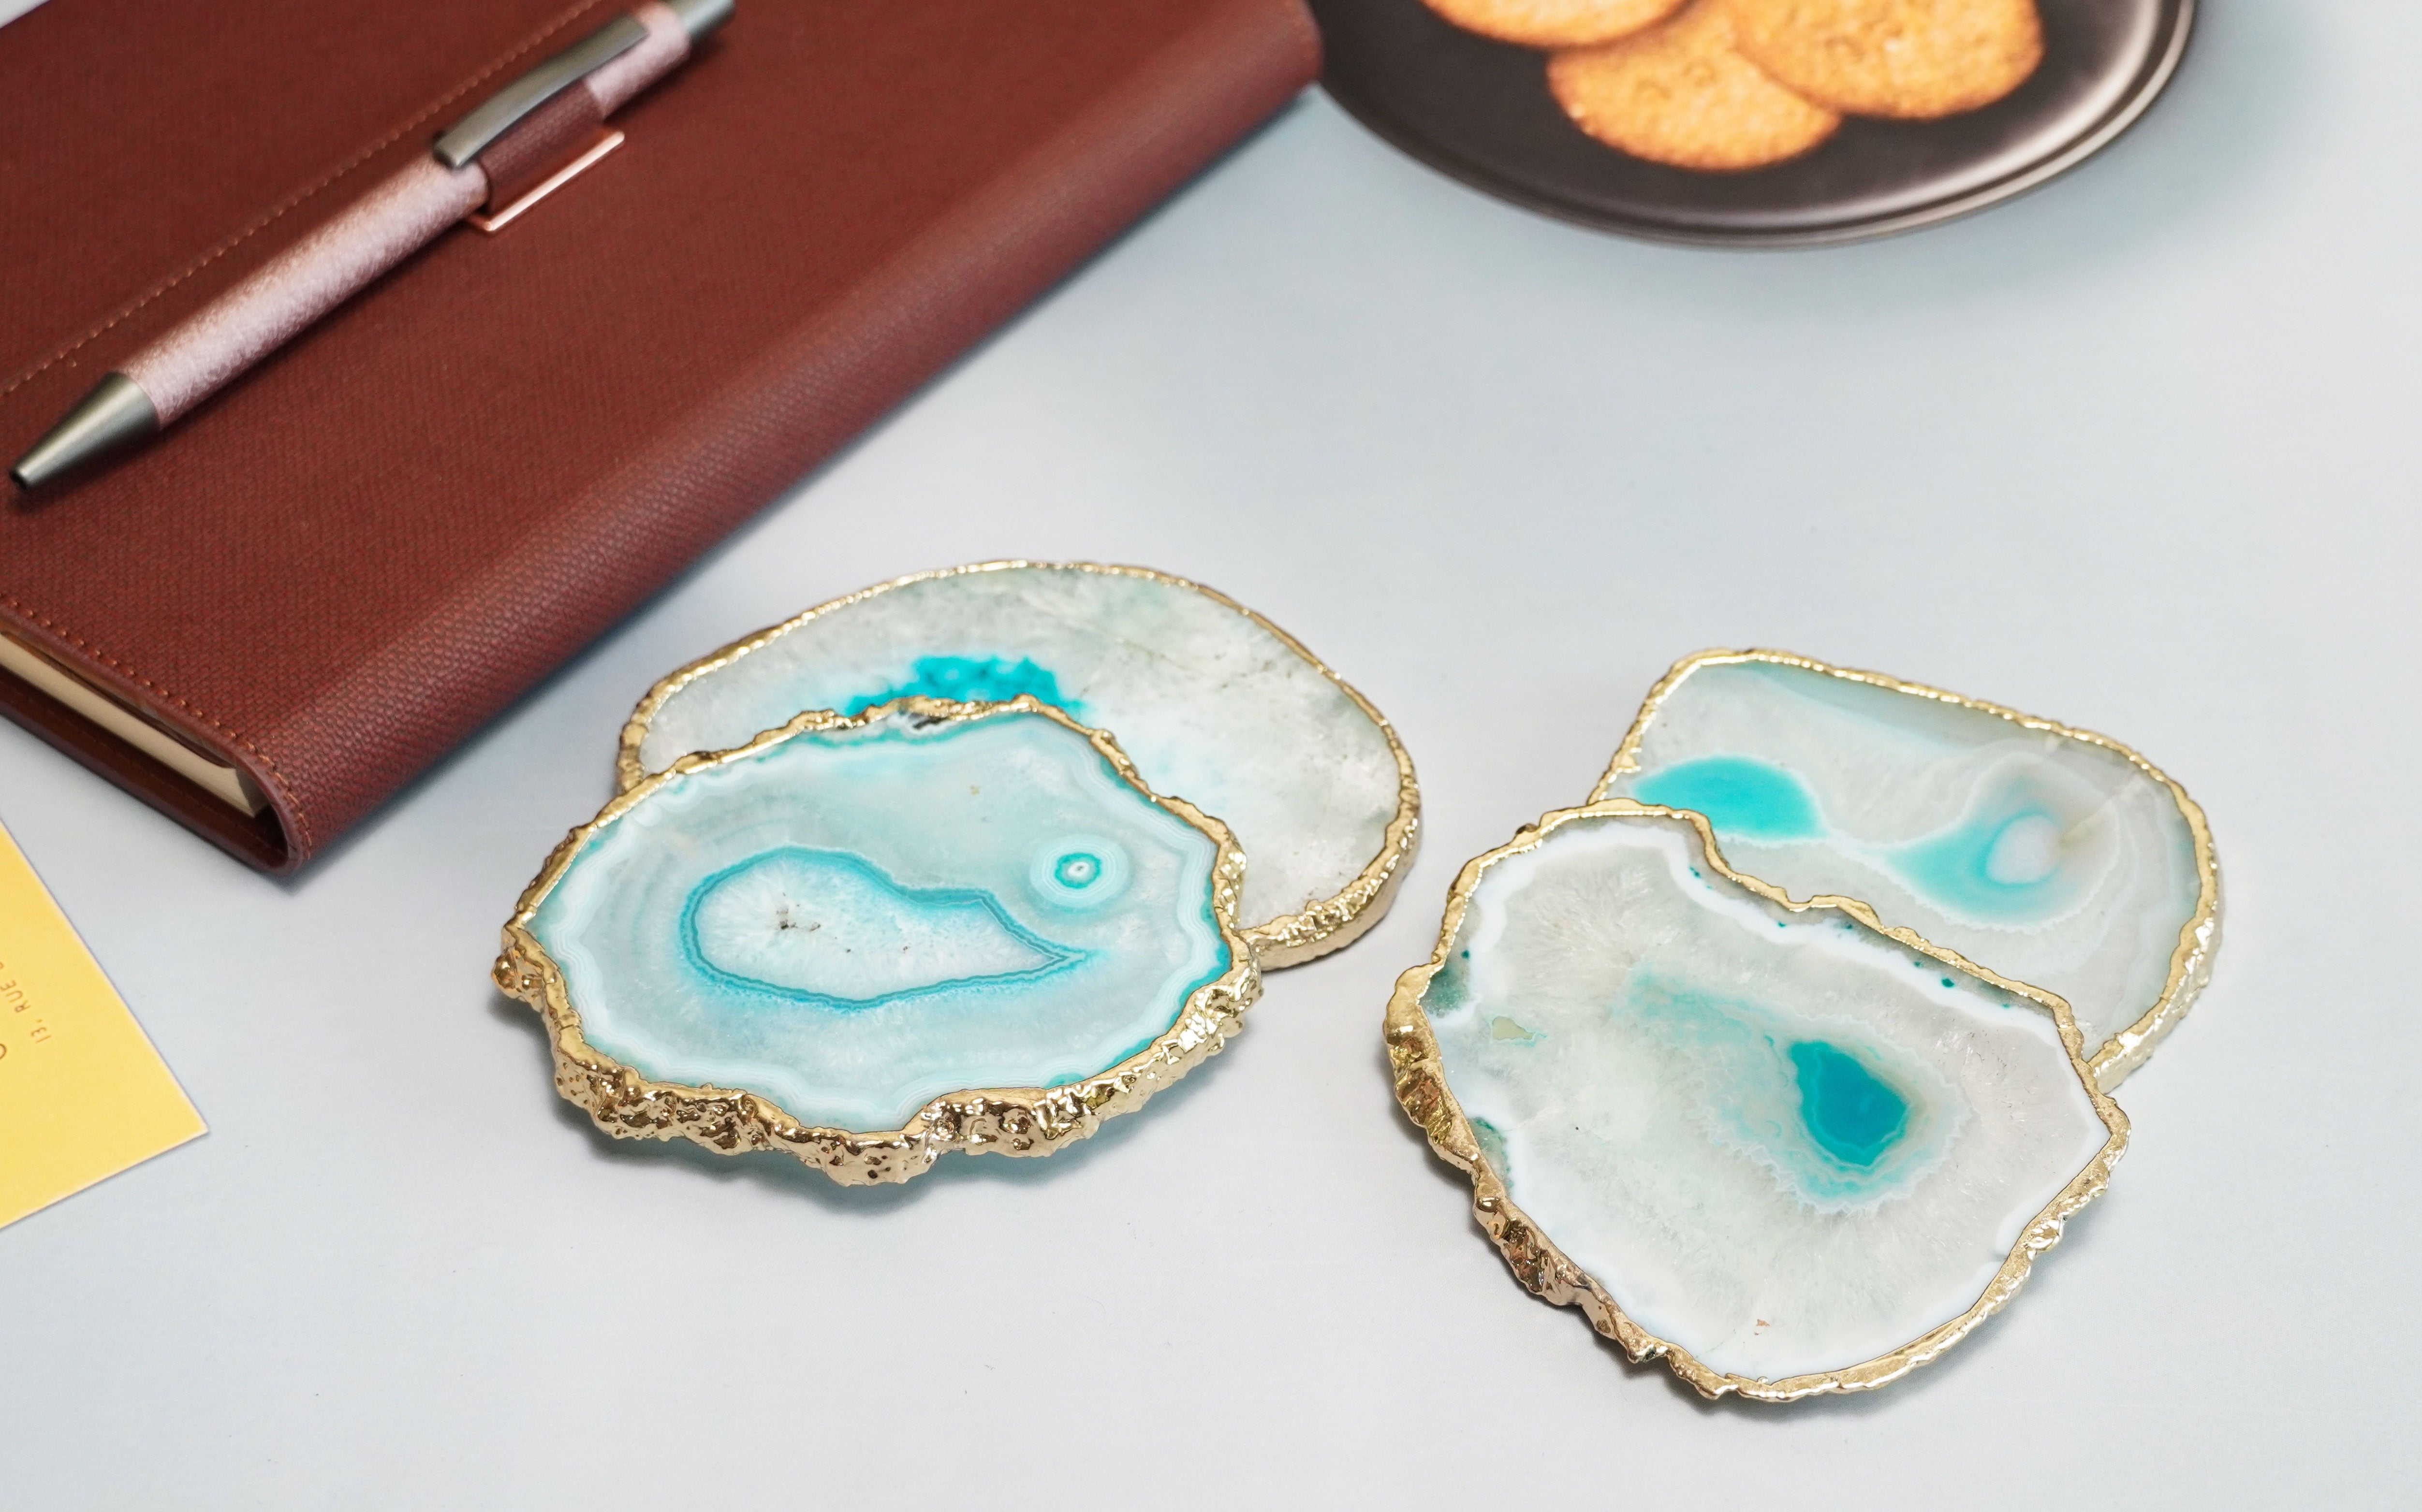 New Jersey BIBELOT Agate Handcrafted Luxury Gold Plated Coasters (Natural, Misty Blue)